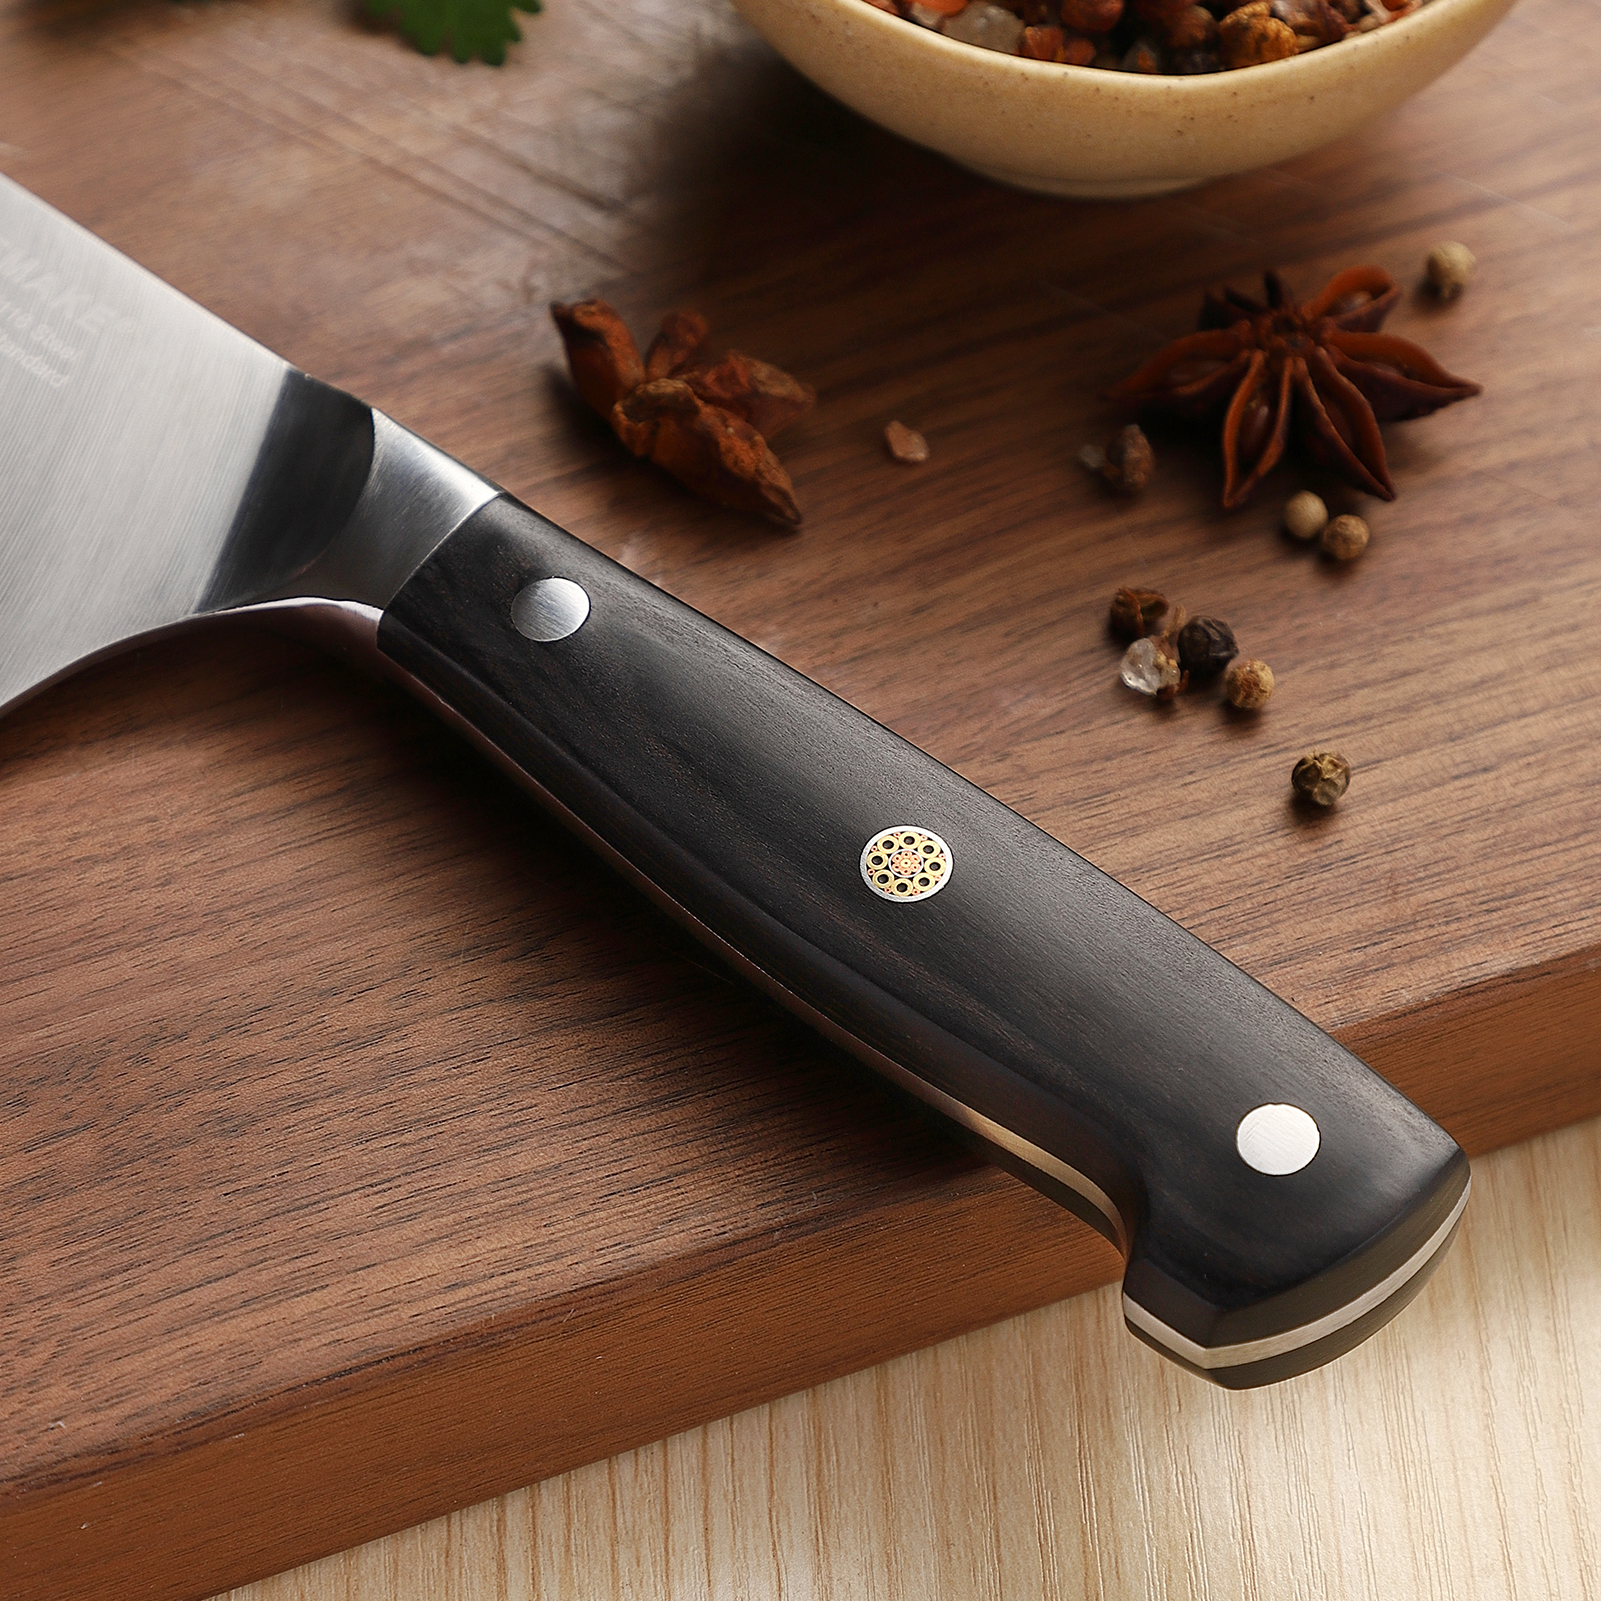 KEEMAKE-Meat Cleaver Knife Heavy Duty with Pakkawood Handle for